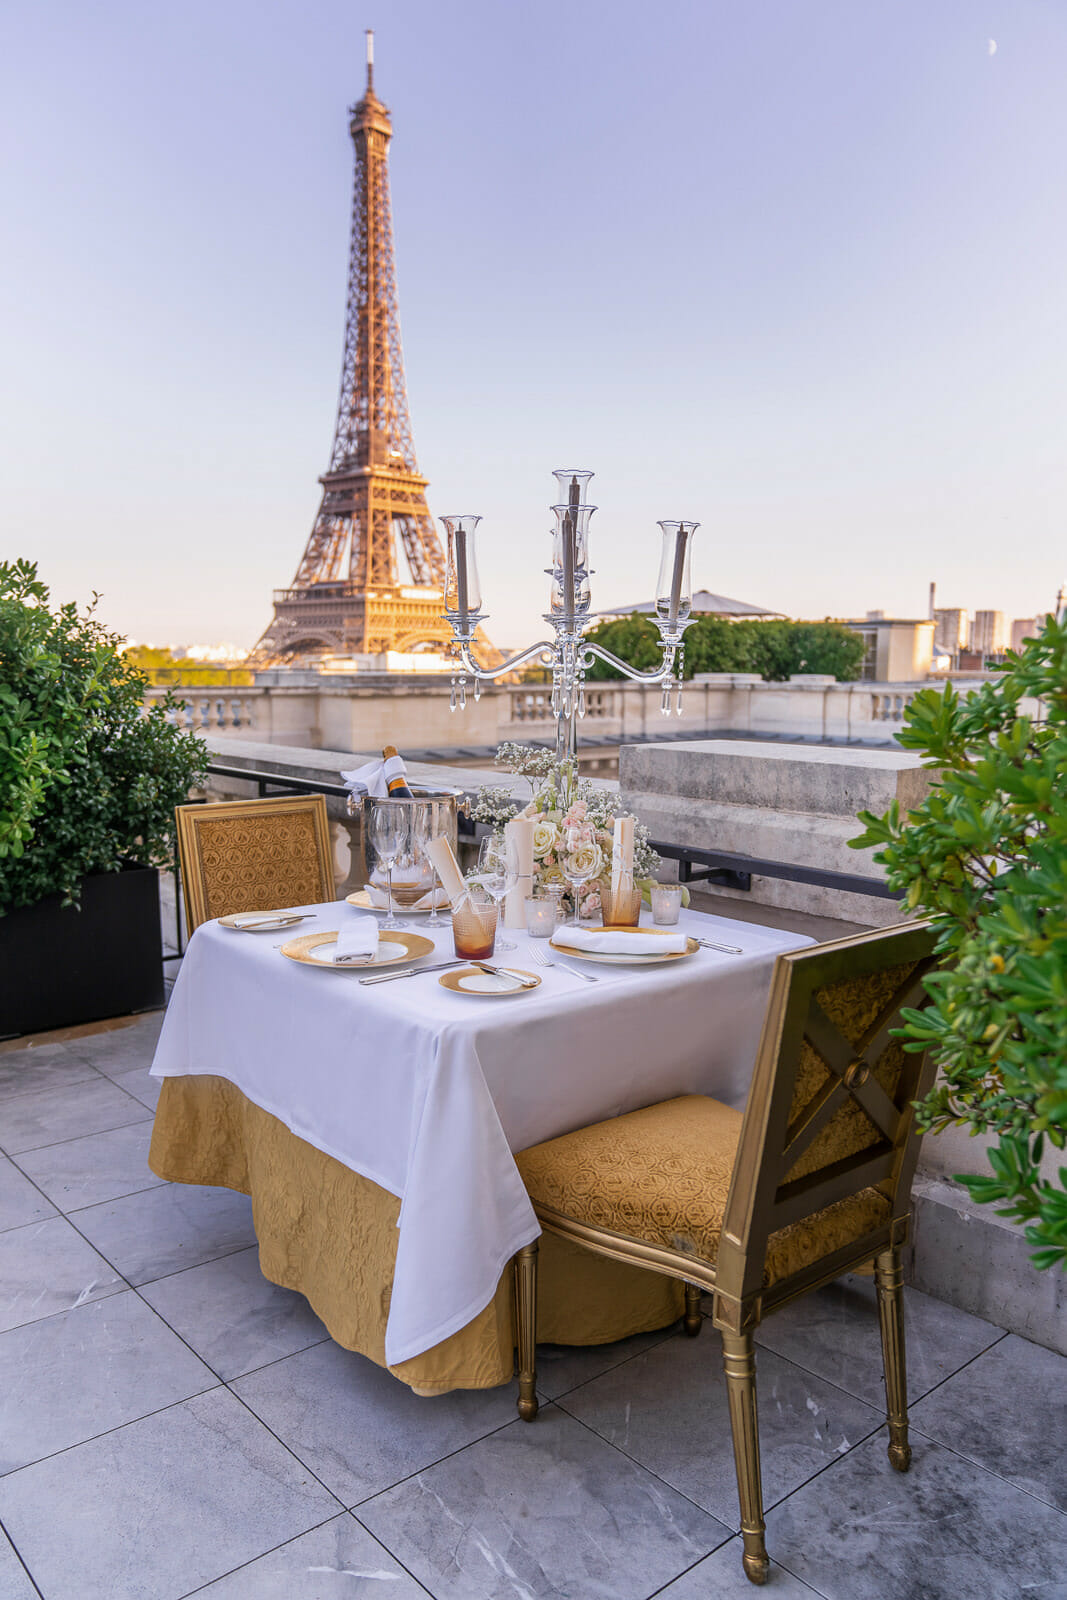 How to propose in Paris: luxury proposal ideas